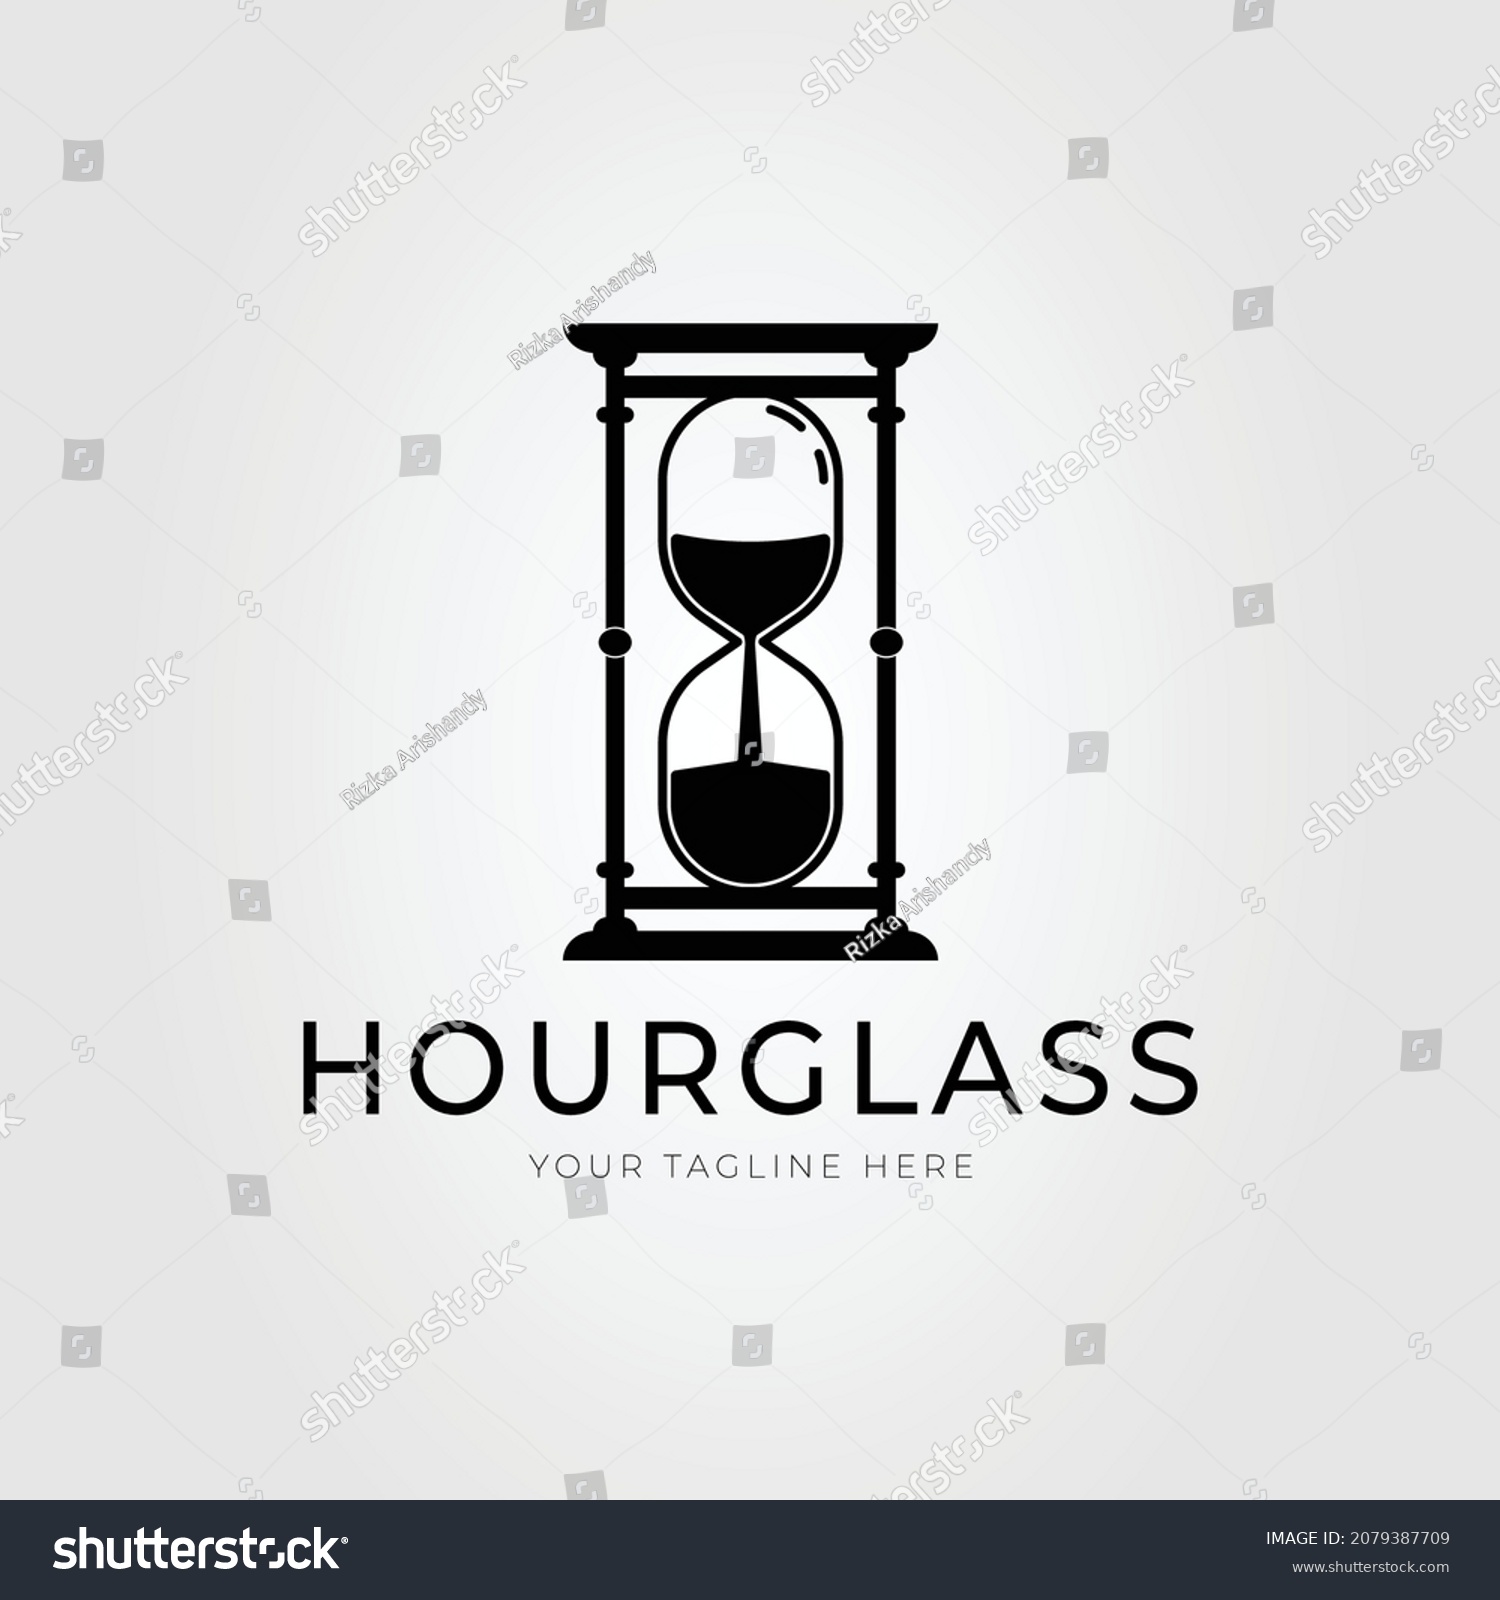 Silhouette Hourglass Classic Sand Timer Logo Stock Vector Royalty Free 2079387709 0586